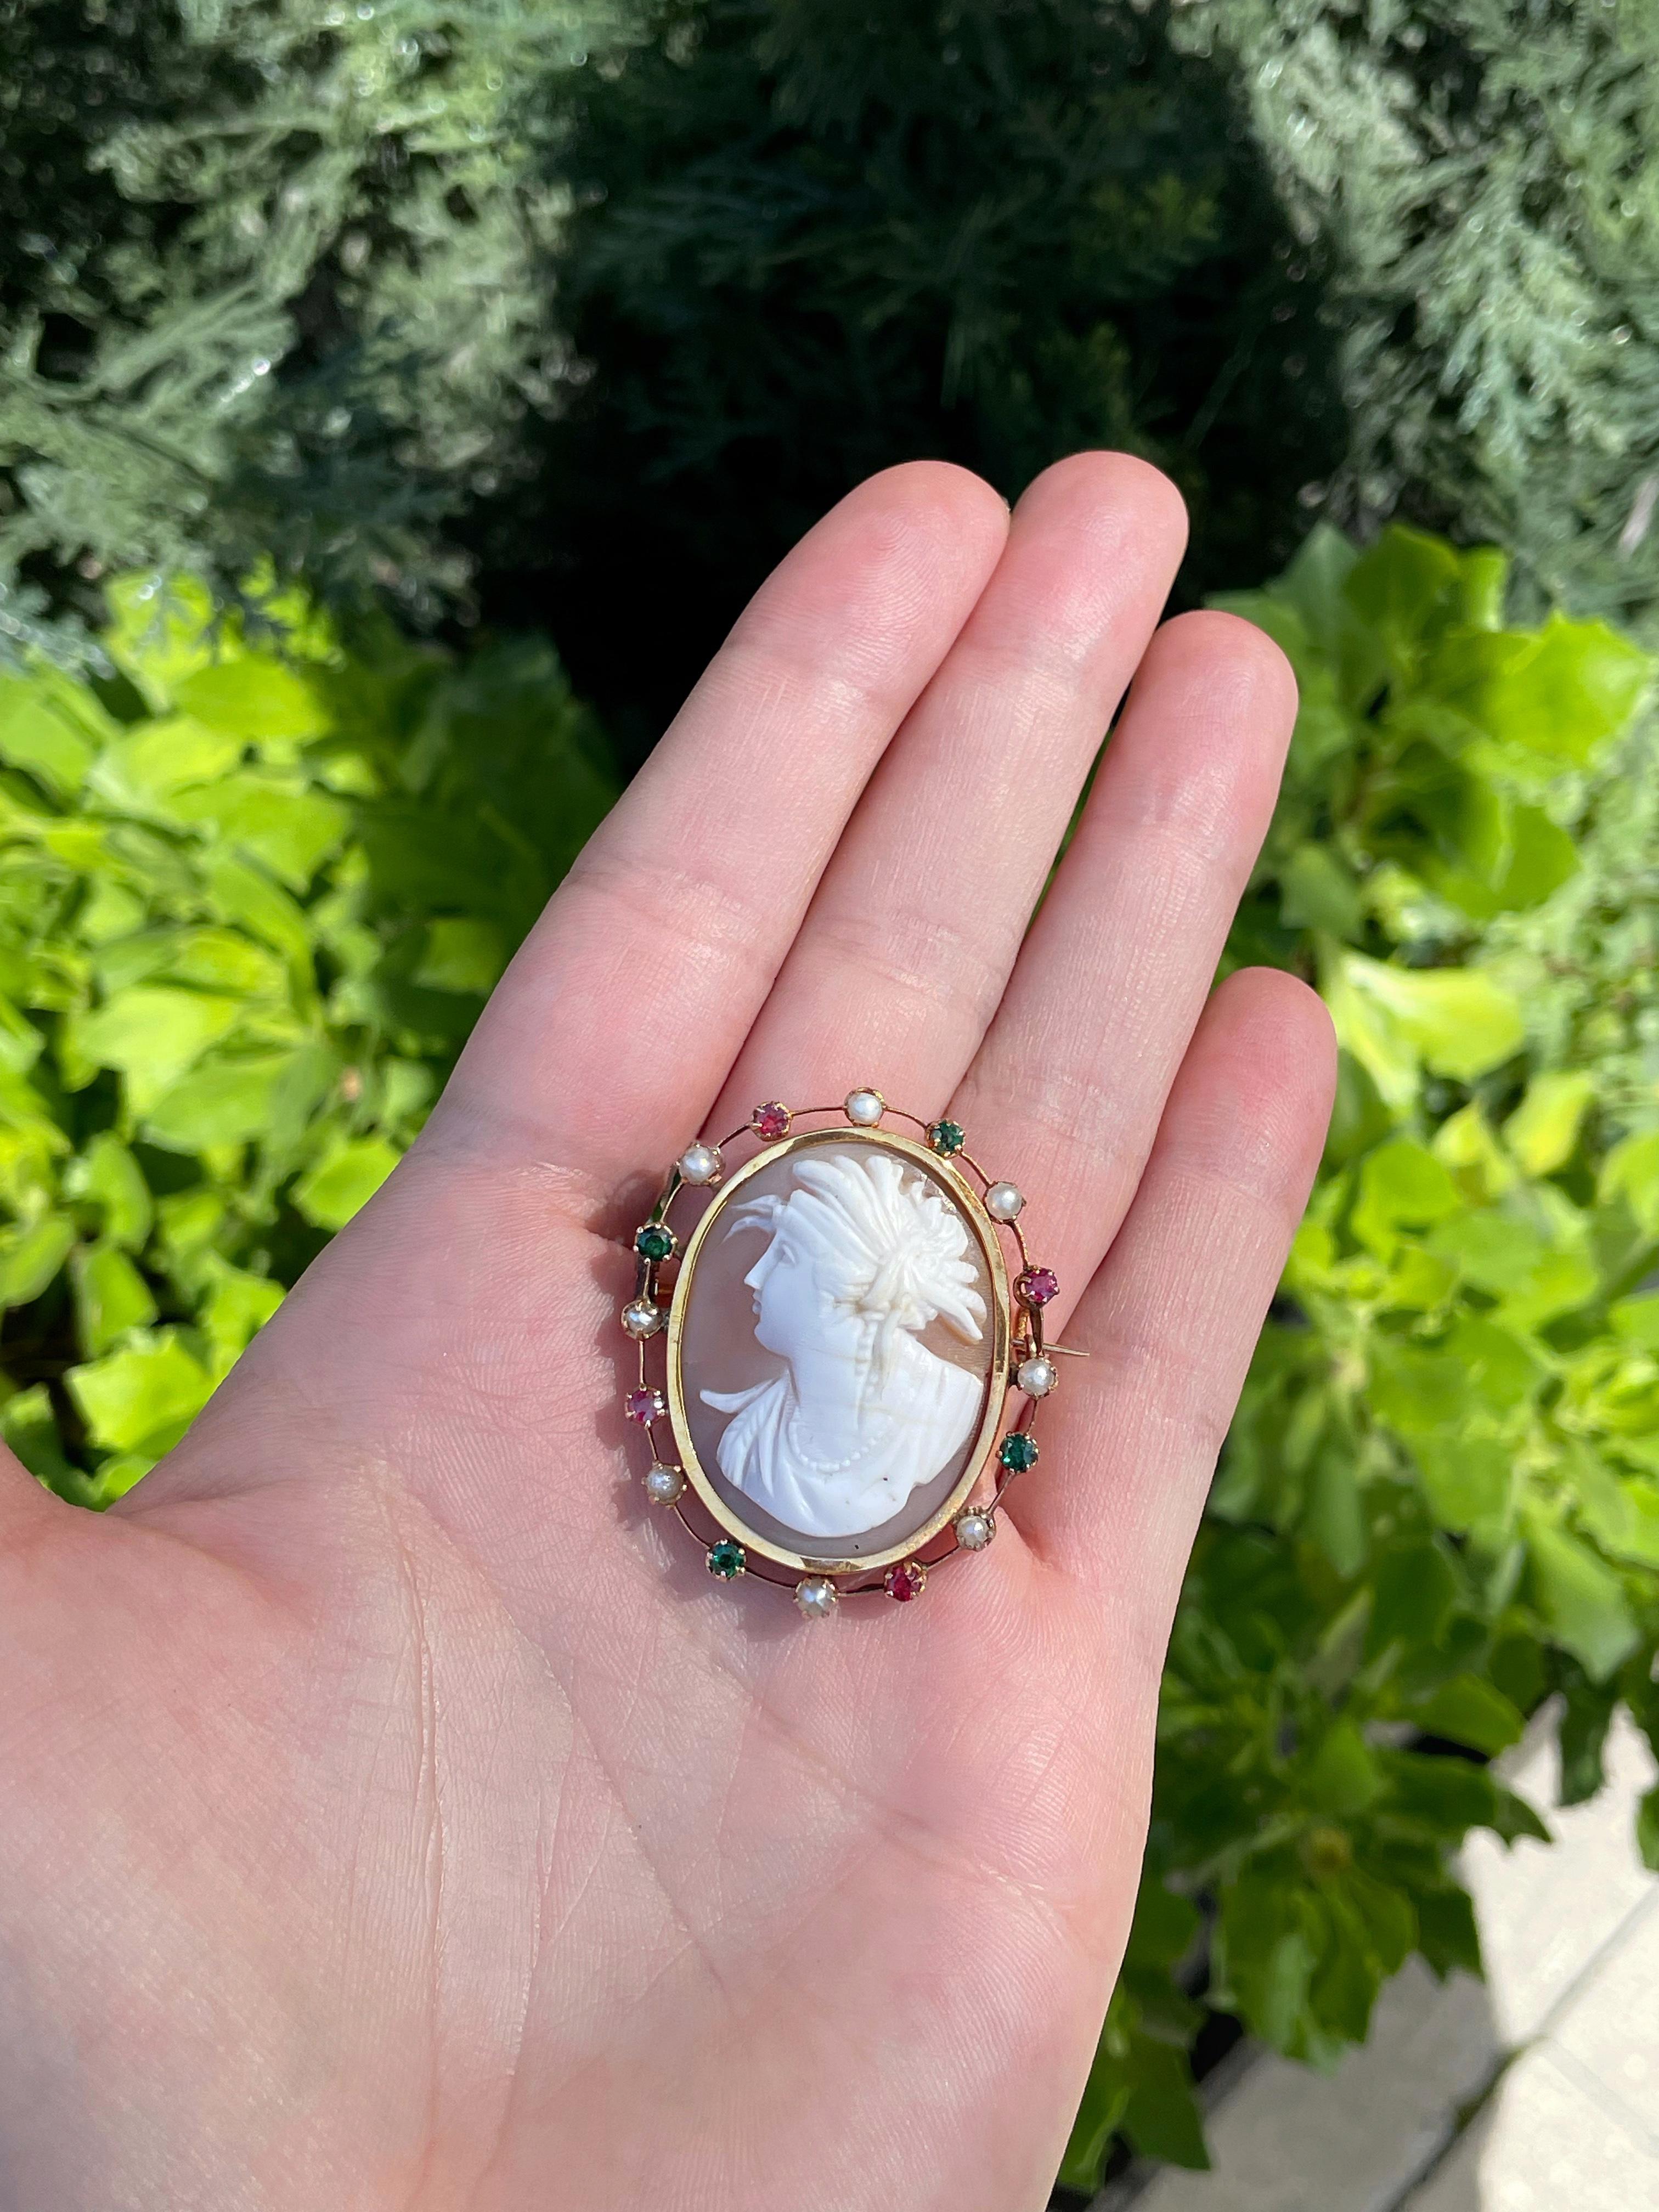 This is an elegant and rare Victorian pin brooch crafted in 14K yellow gold. The cameo is carved from shell. The frame is decorated with 4 red garnets (~0.32ct), 4 green glass and 8 cultured pearls. The inner part has a metal reinforcements.

The